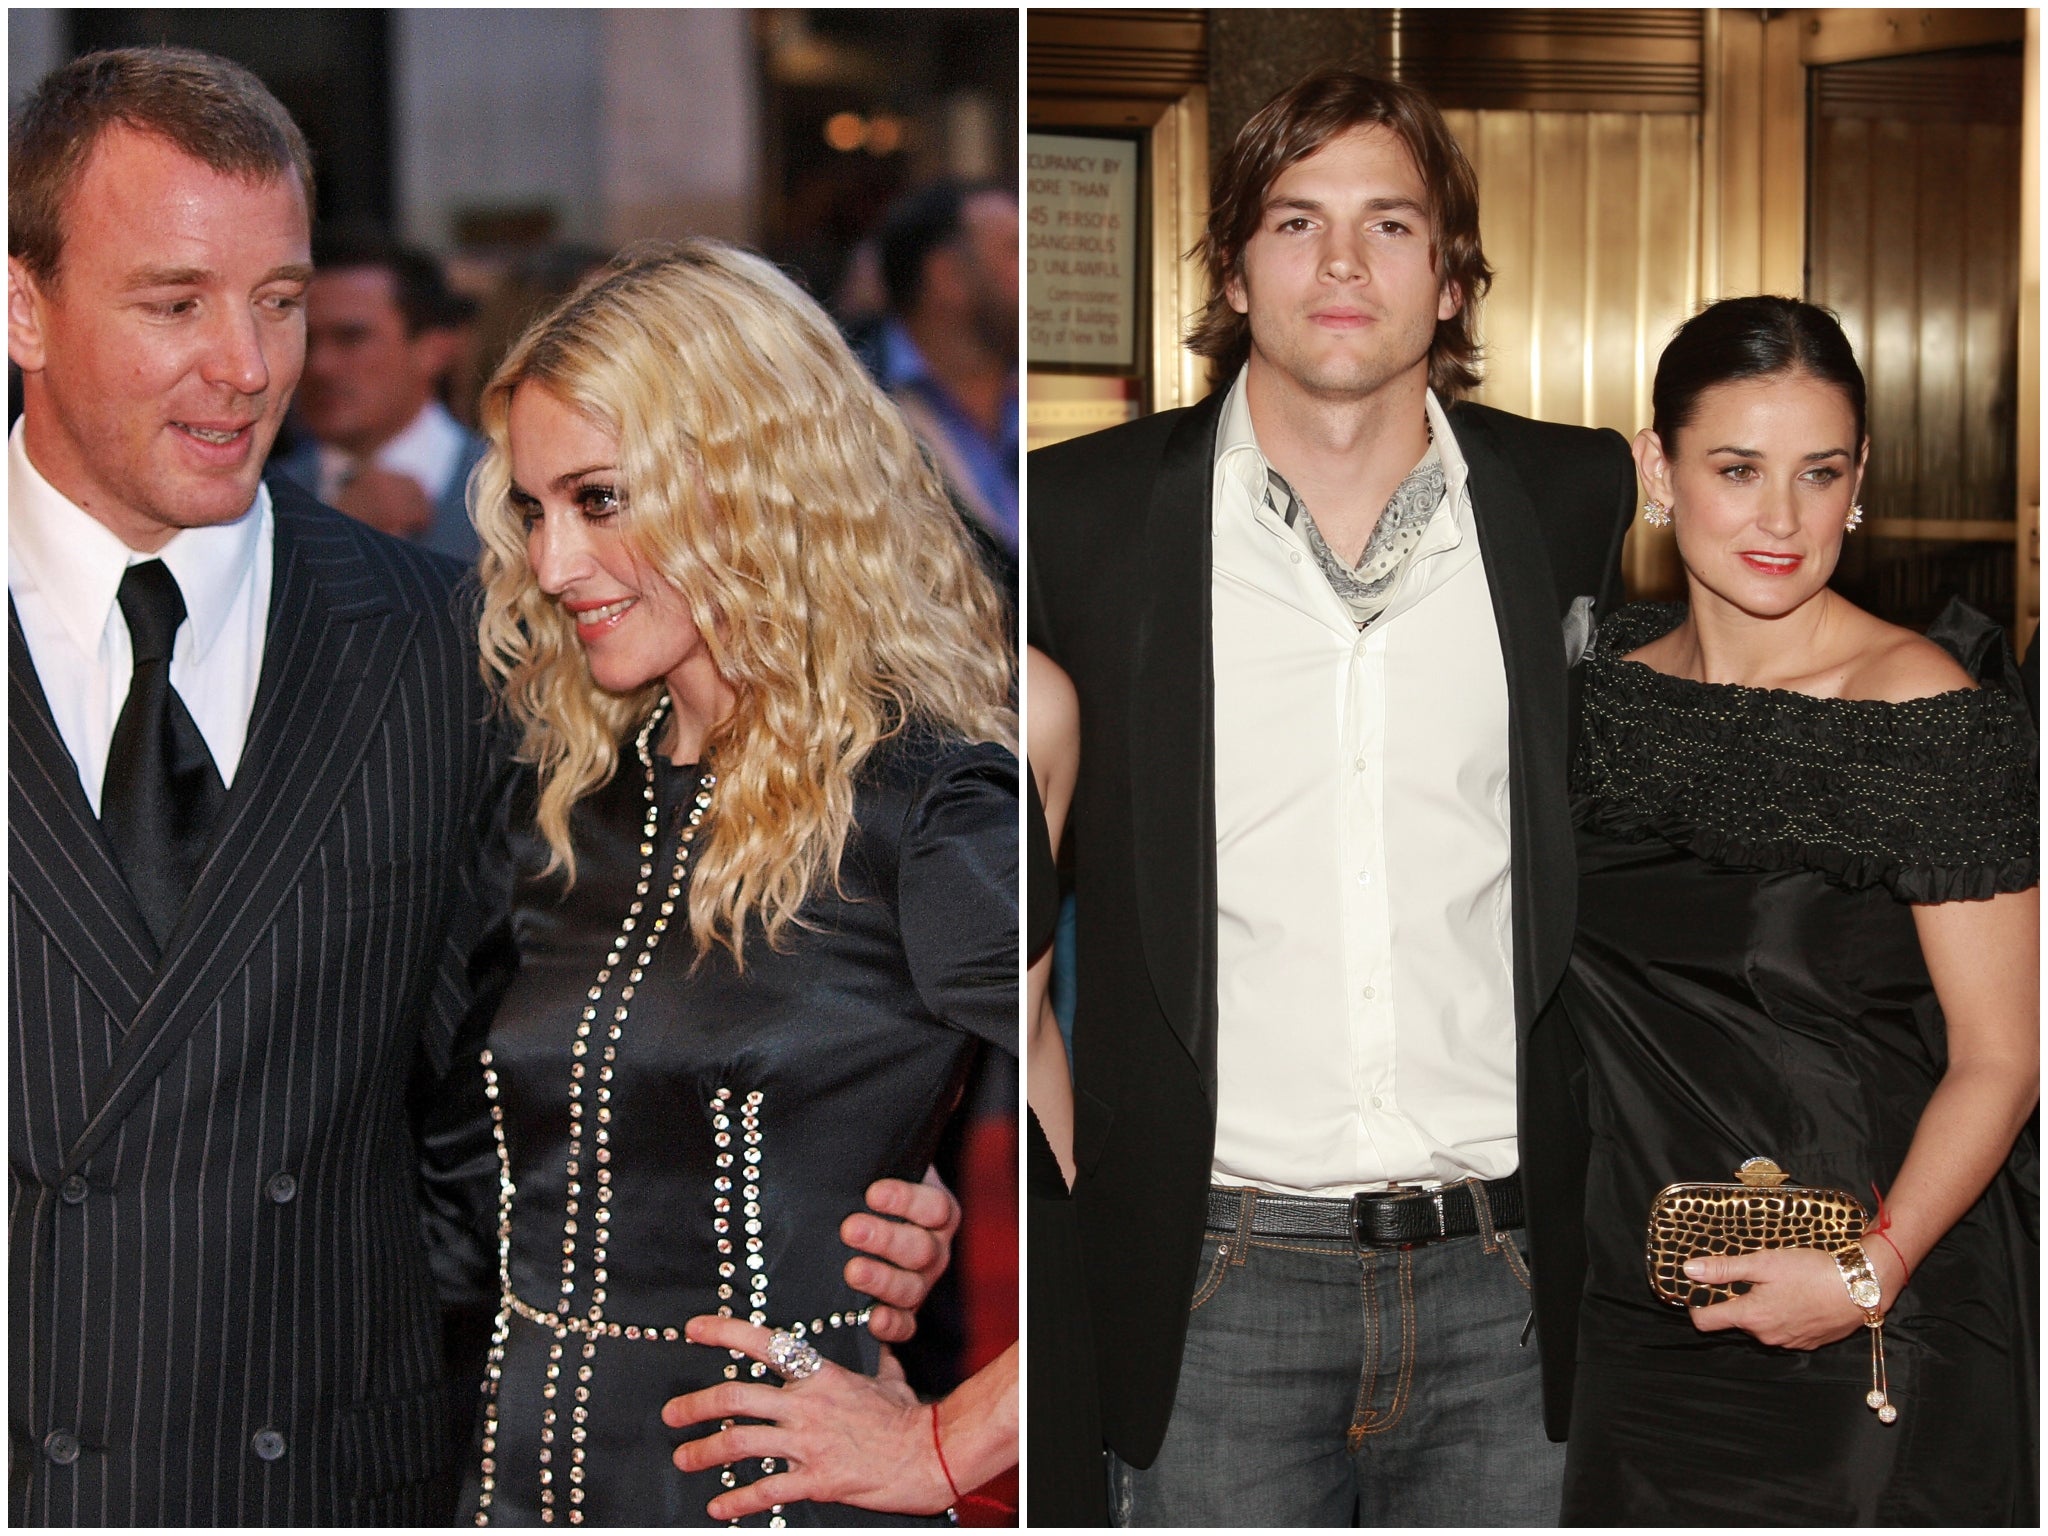 Guy Ritchie and Madonna in 2008 (left) and Adam Kutcher and Demi Moore in 2007 (right). Both Madonna and Moore wear red string on their left wrist